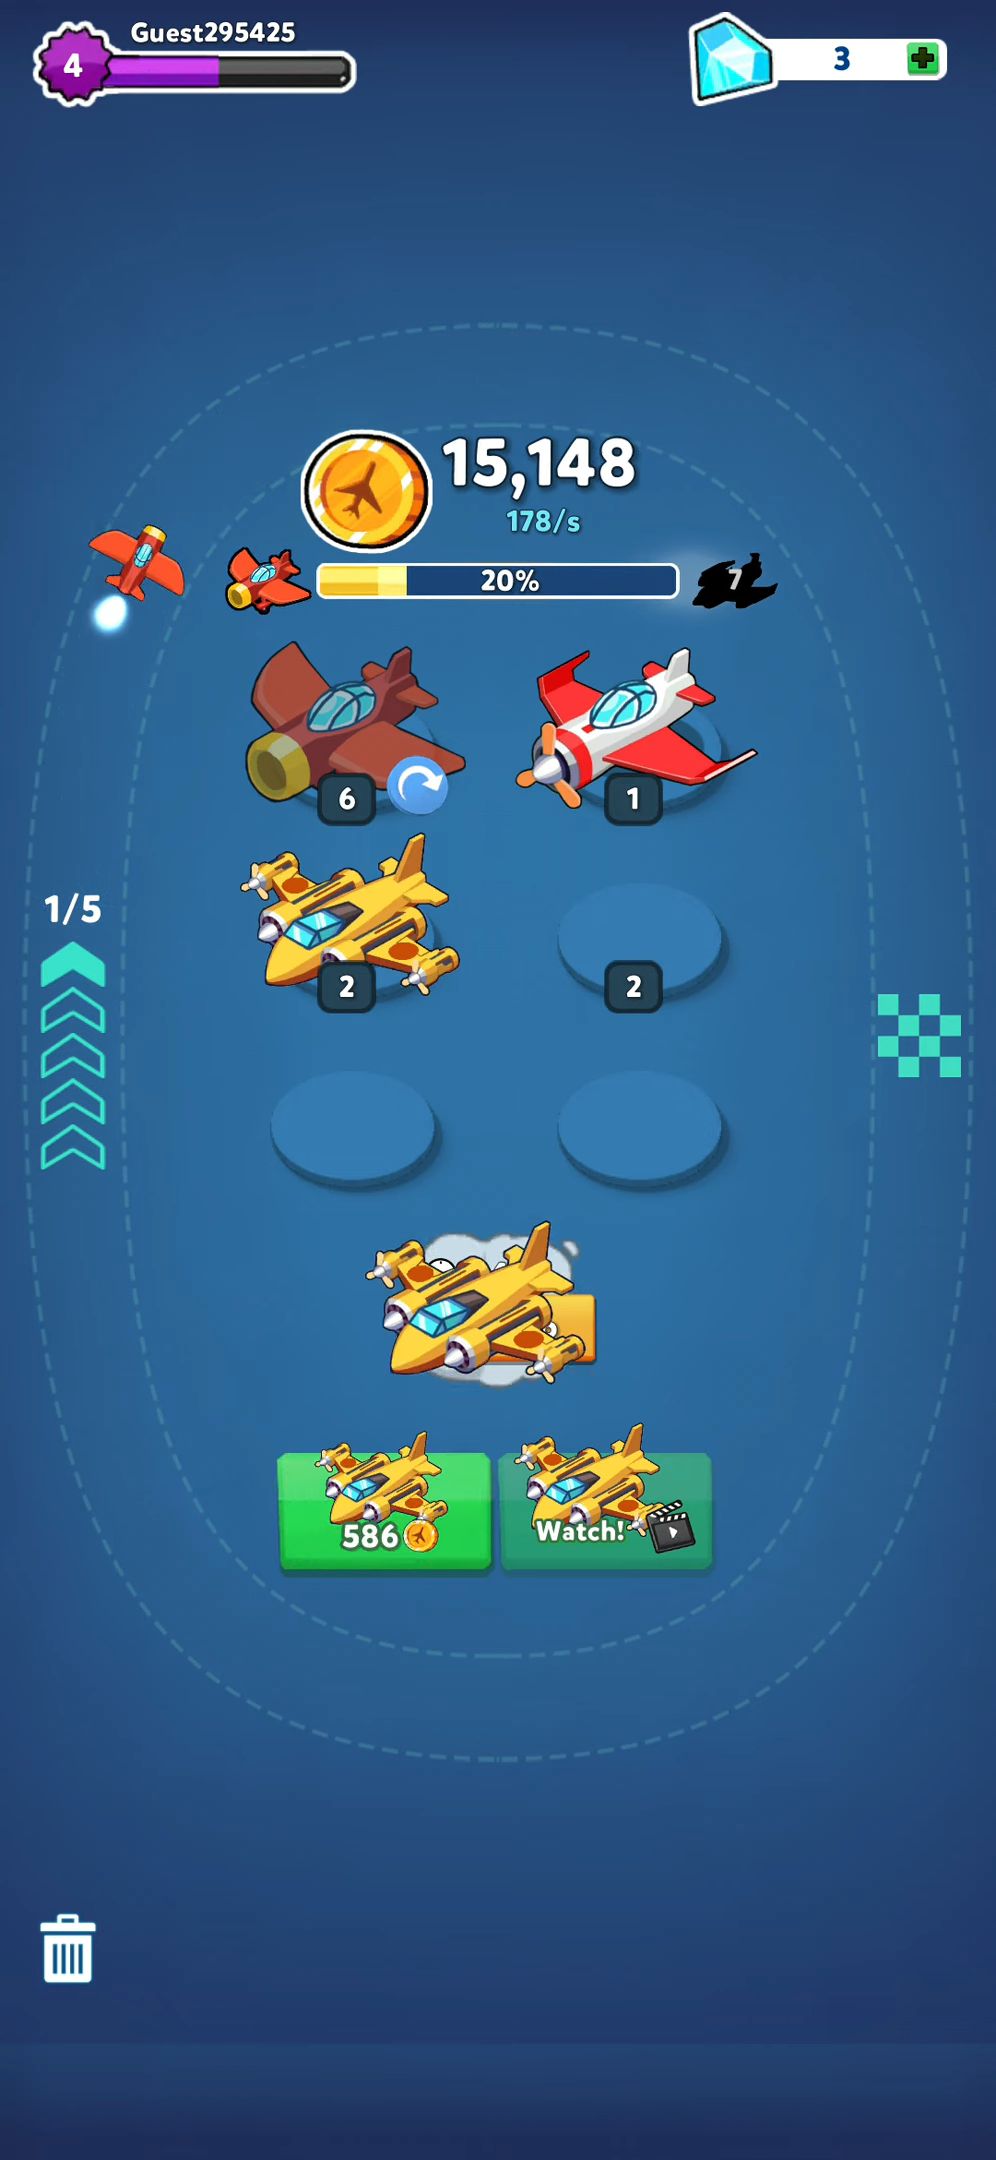 Merge Airplane 2: Plane & Clicker Tycoon for Android